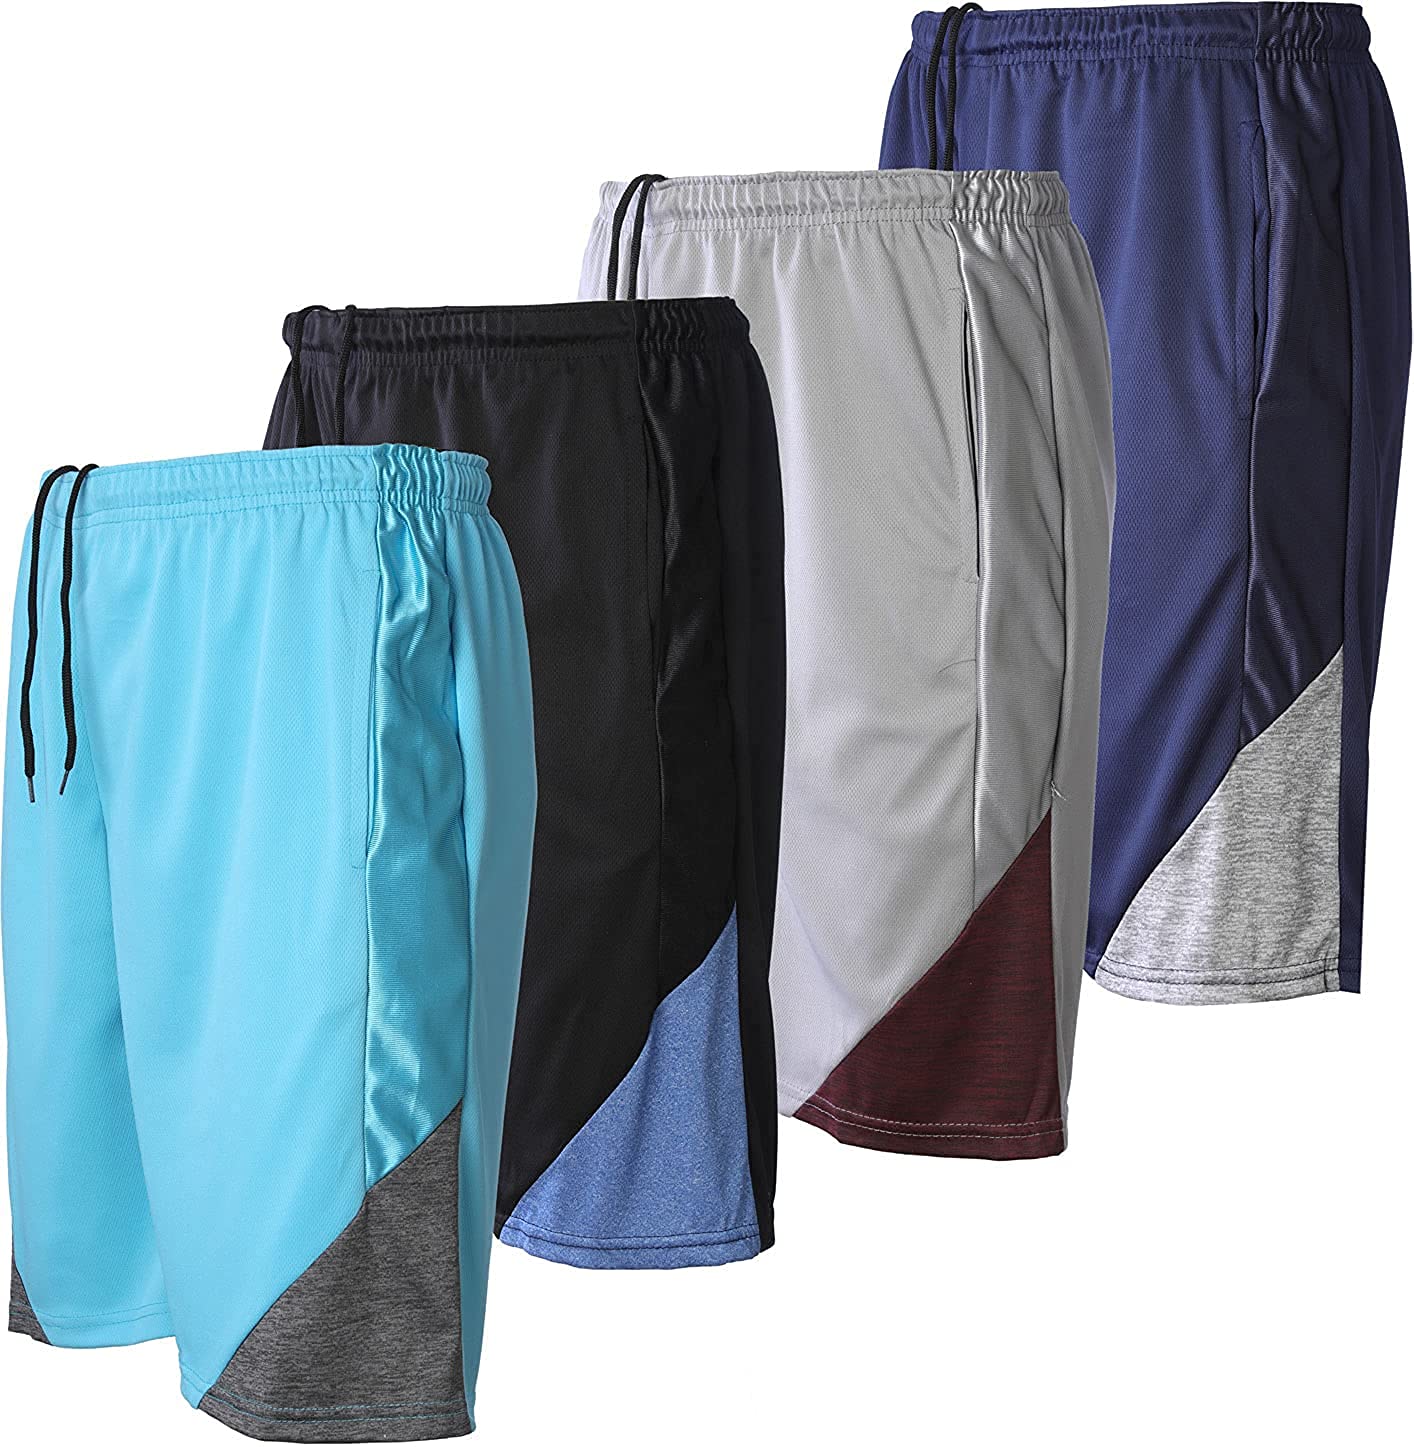 Active Club Men's Athletic Gym Shorts with Pockets Quick Dry Running Workout Training Basketball Shorts